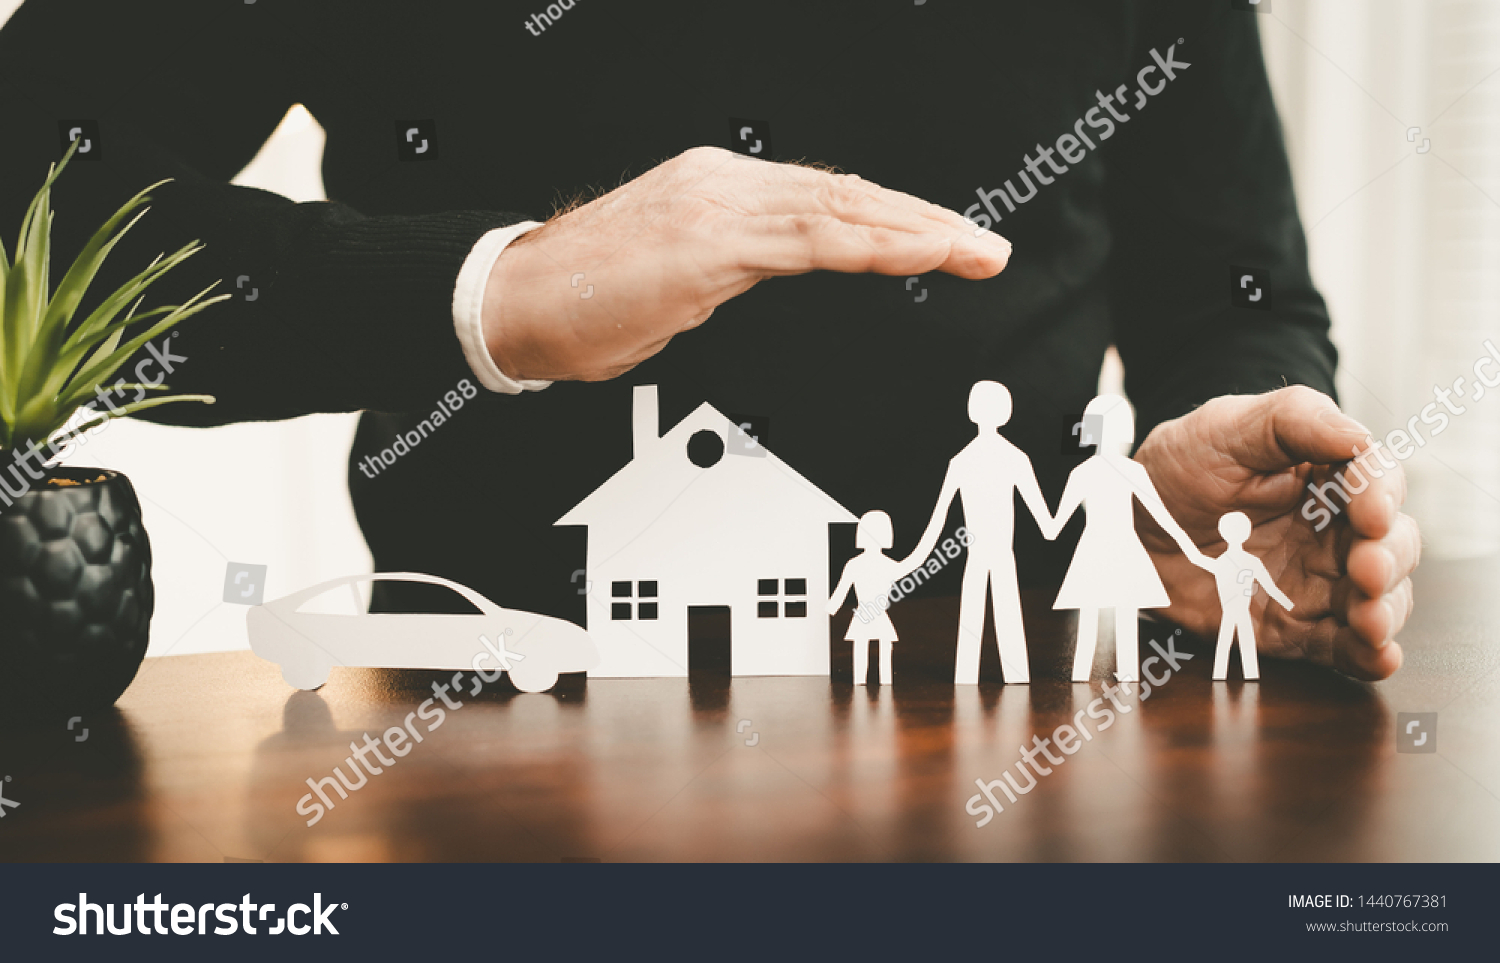 Insurer protecting a family, a house and a car with his hands #1440767381